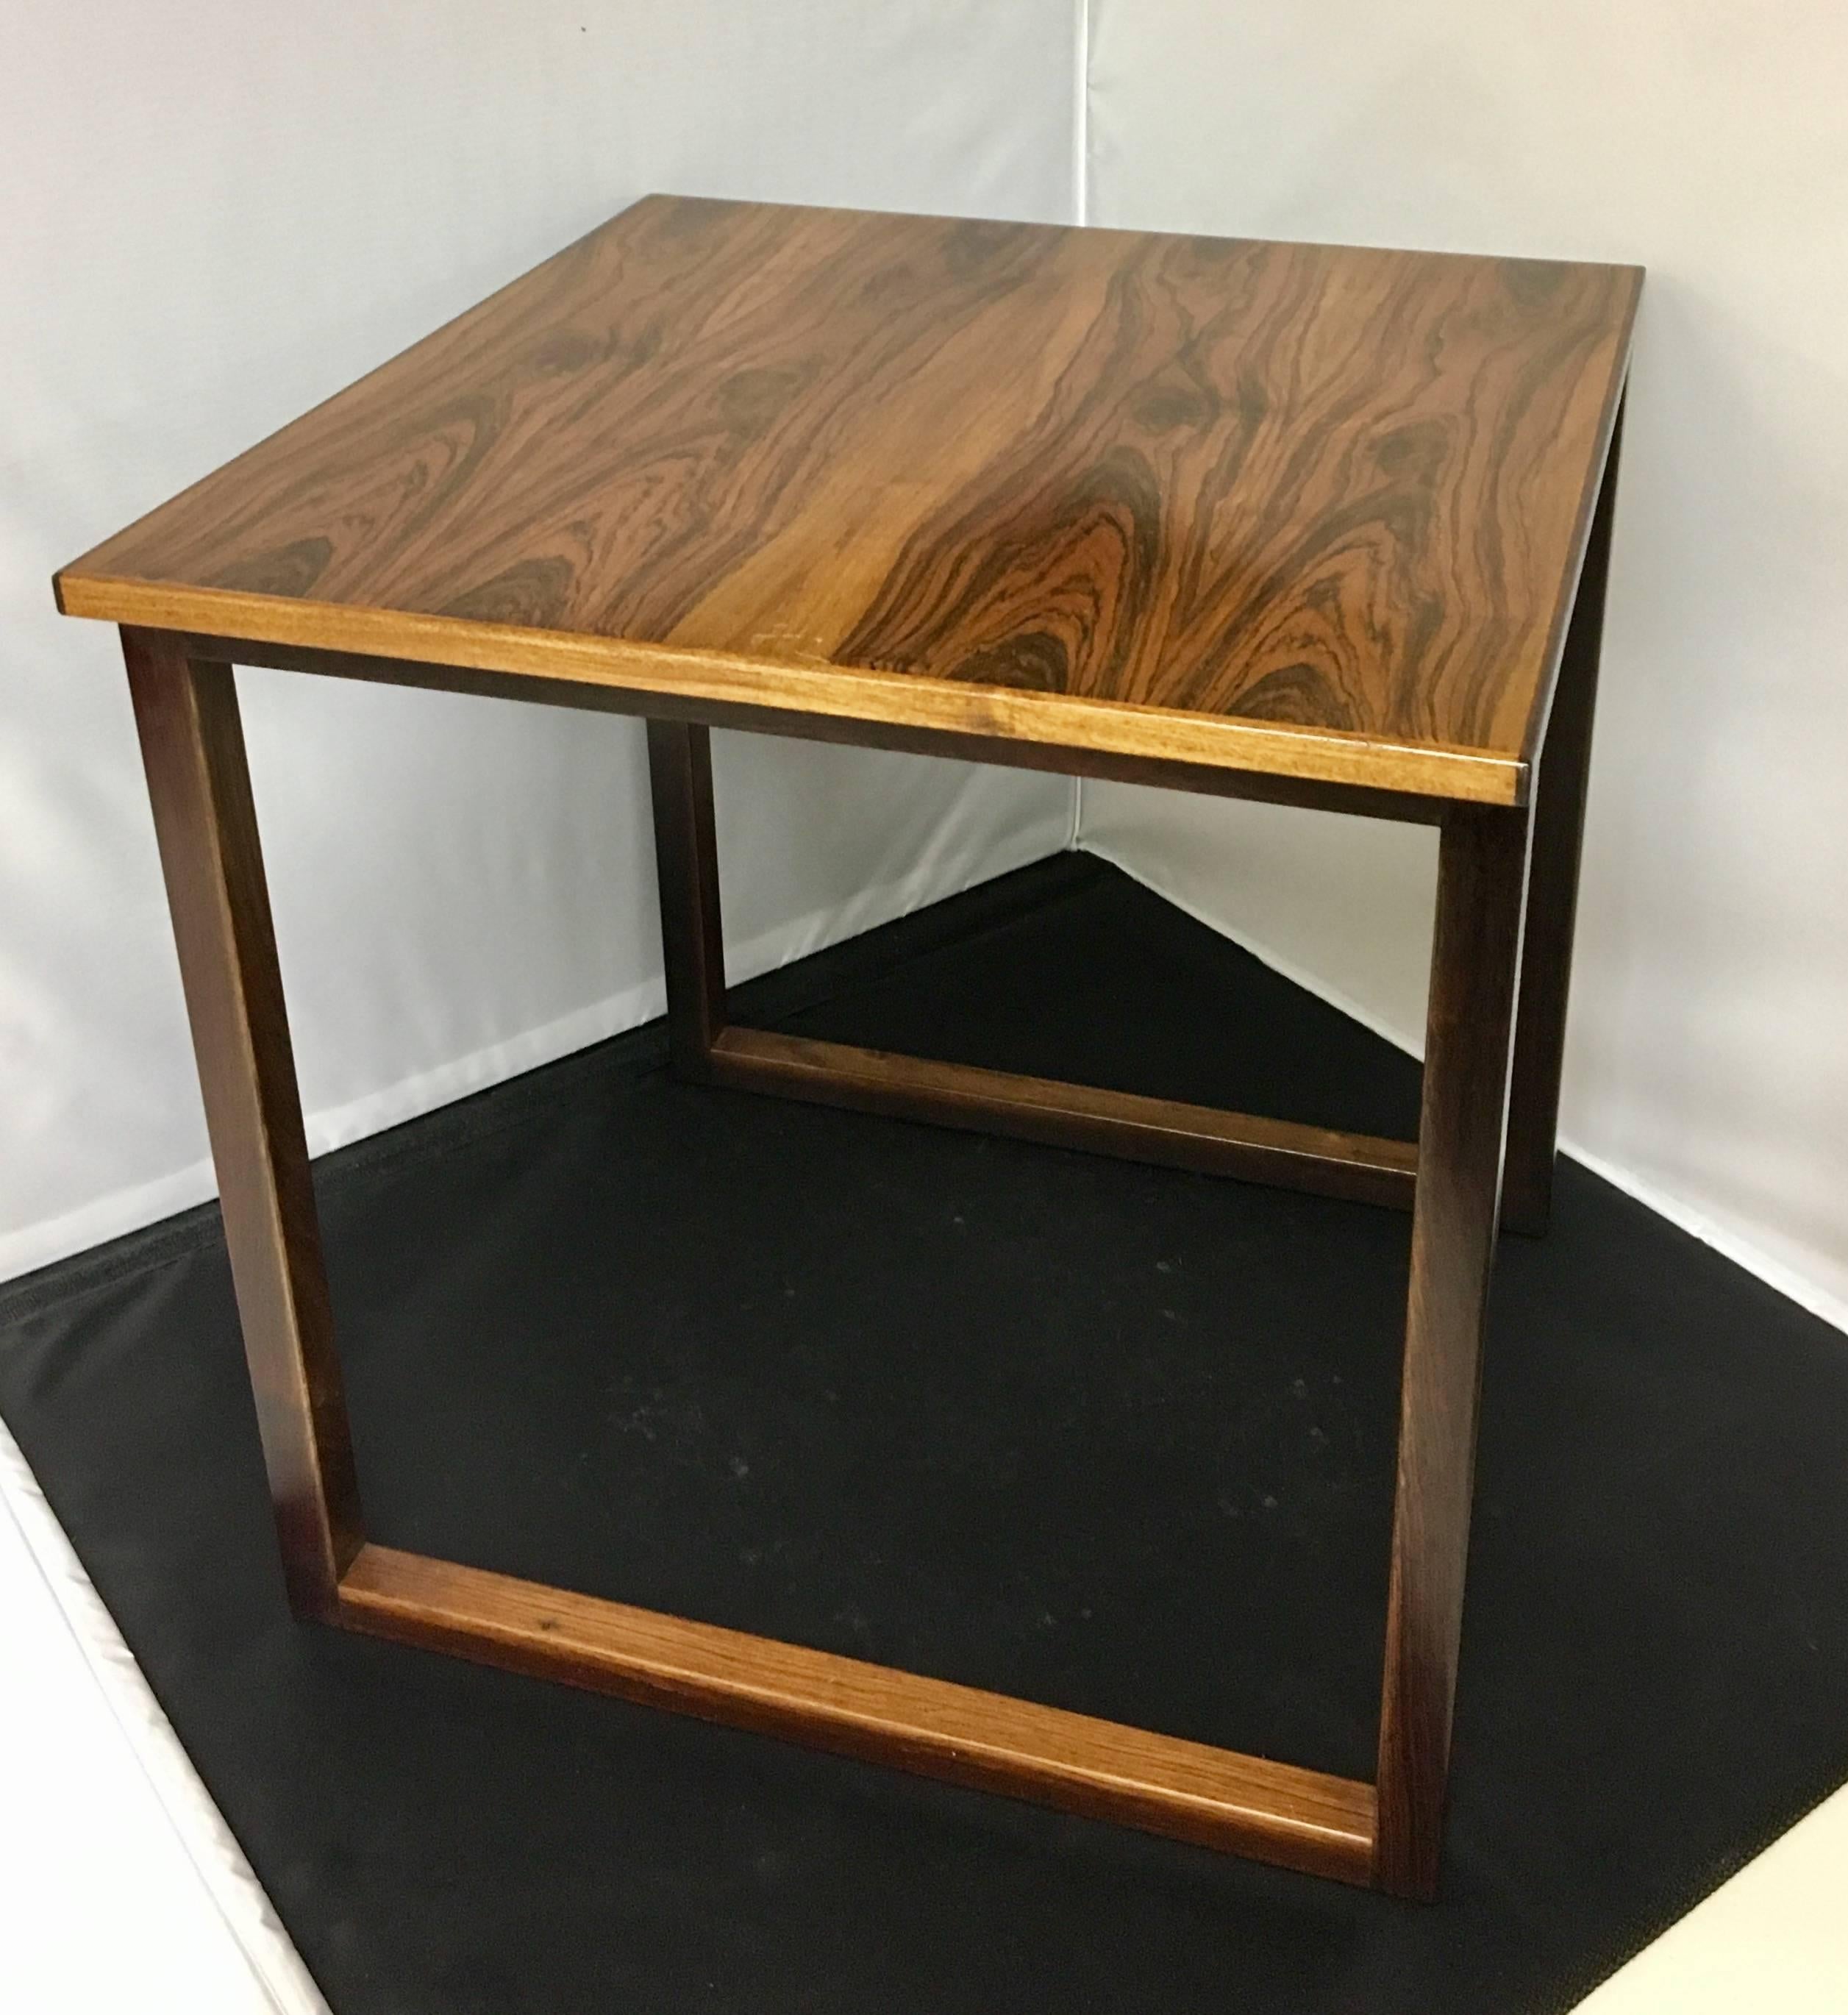 Simple elegant rosewood small square cocktail end table nice solid rosewood legs, high craftsmanship and beautiful grain.